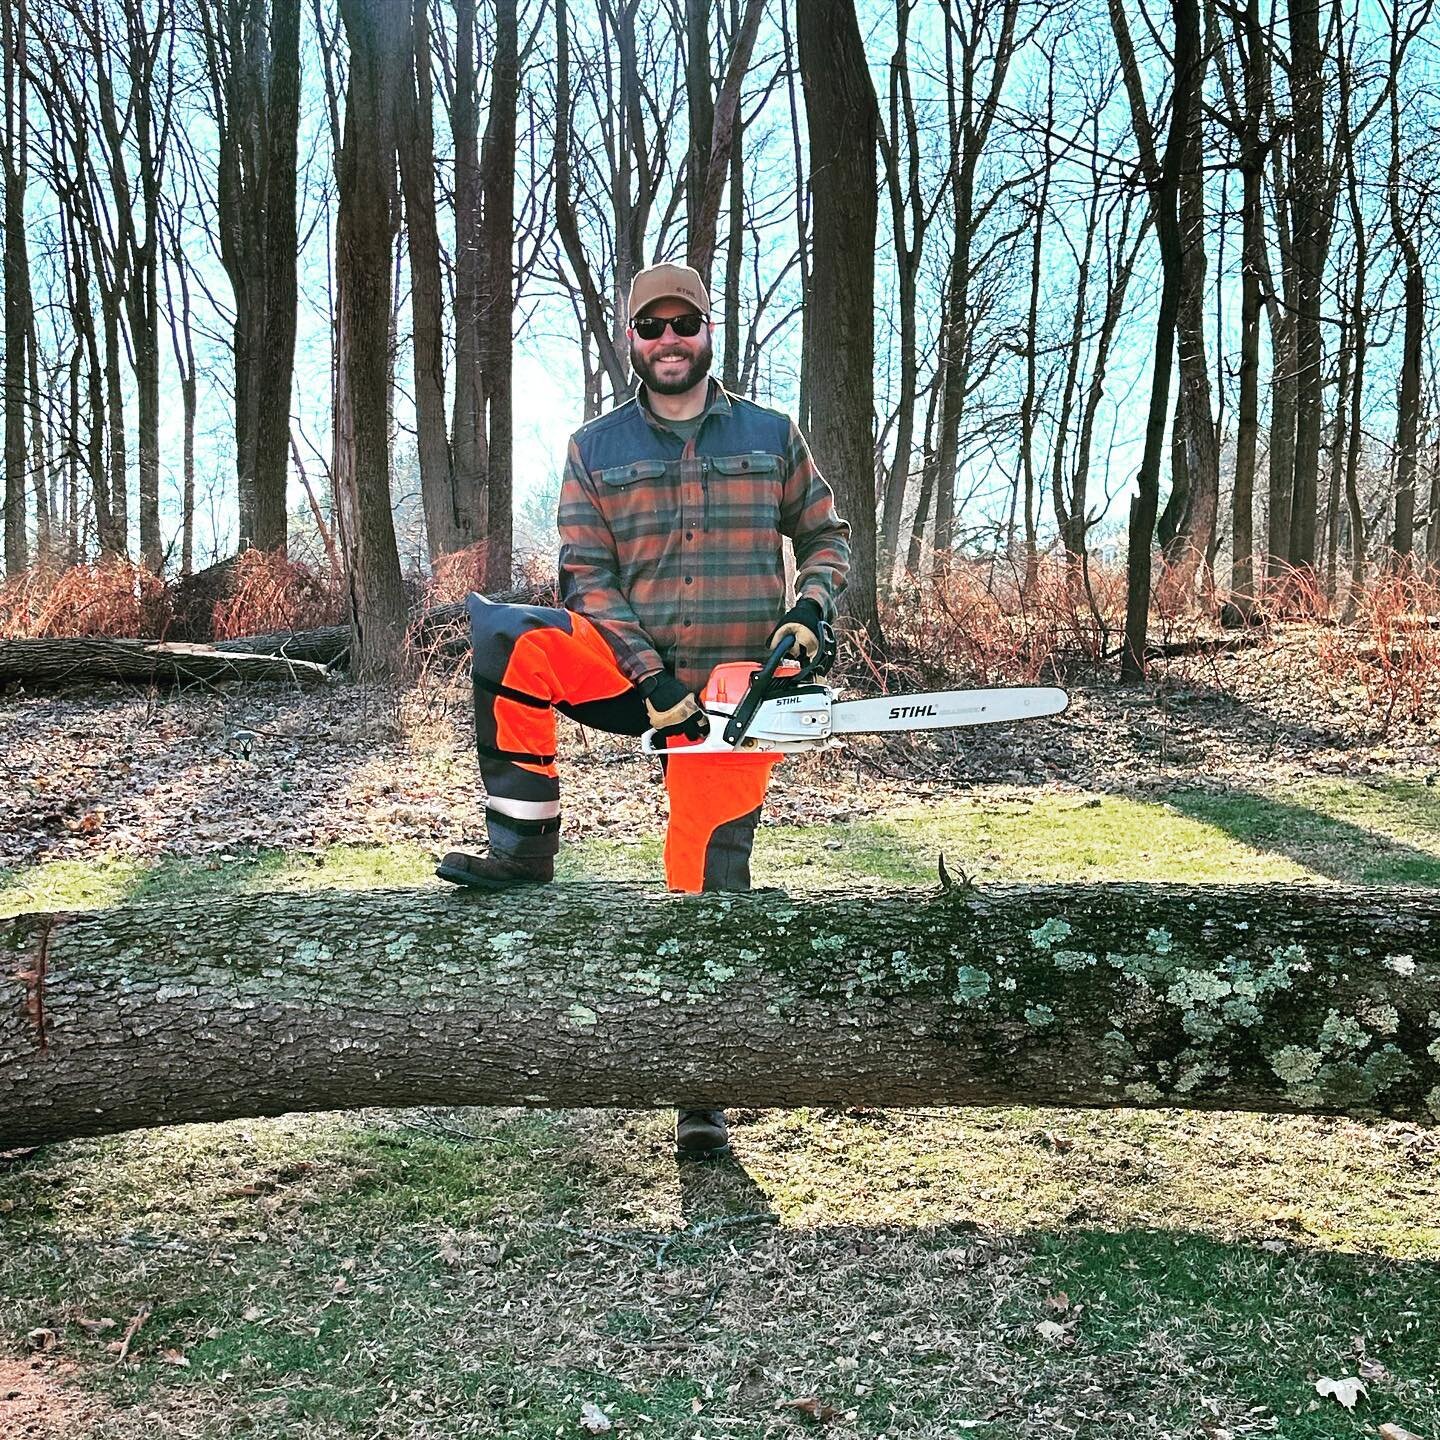 New gear getting put to use and a new new way to pass the time. 

@stihl @fiskars